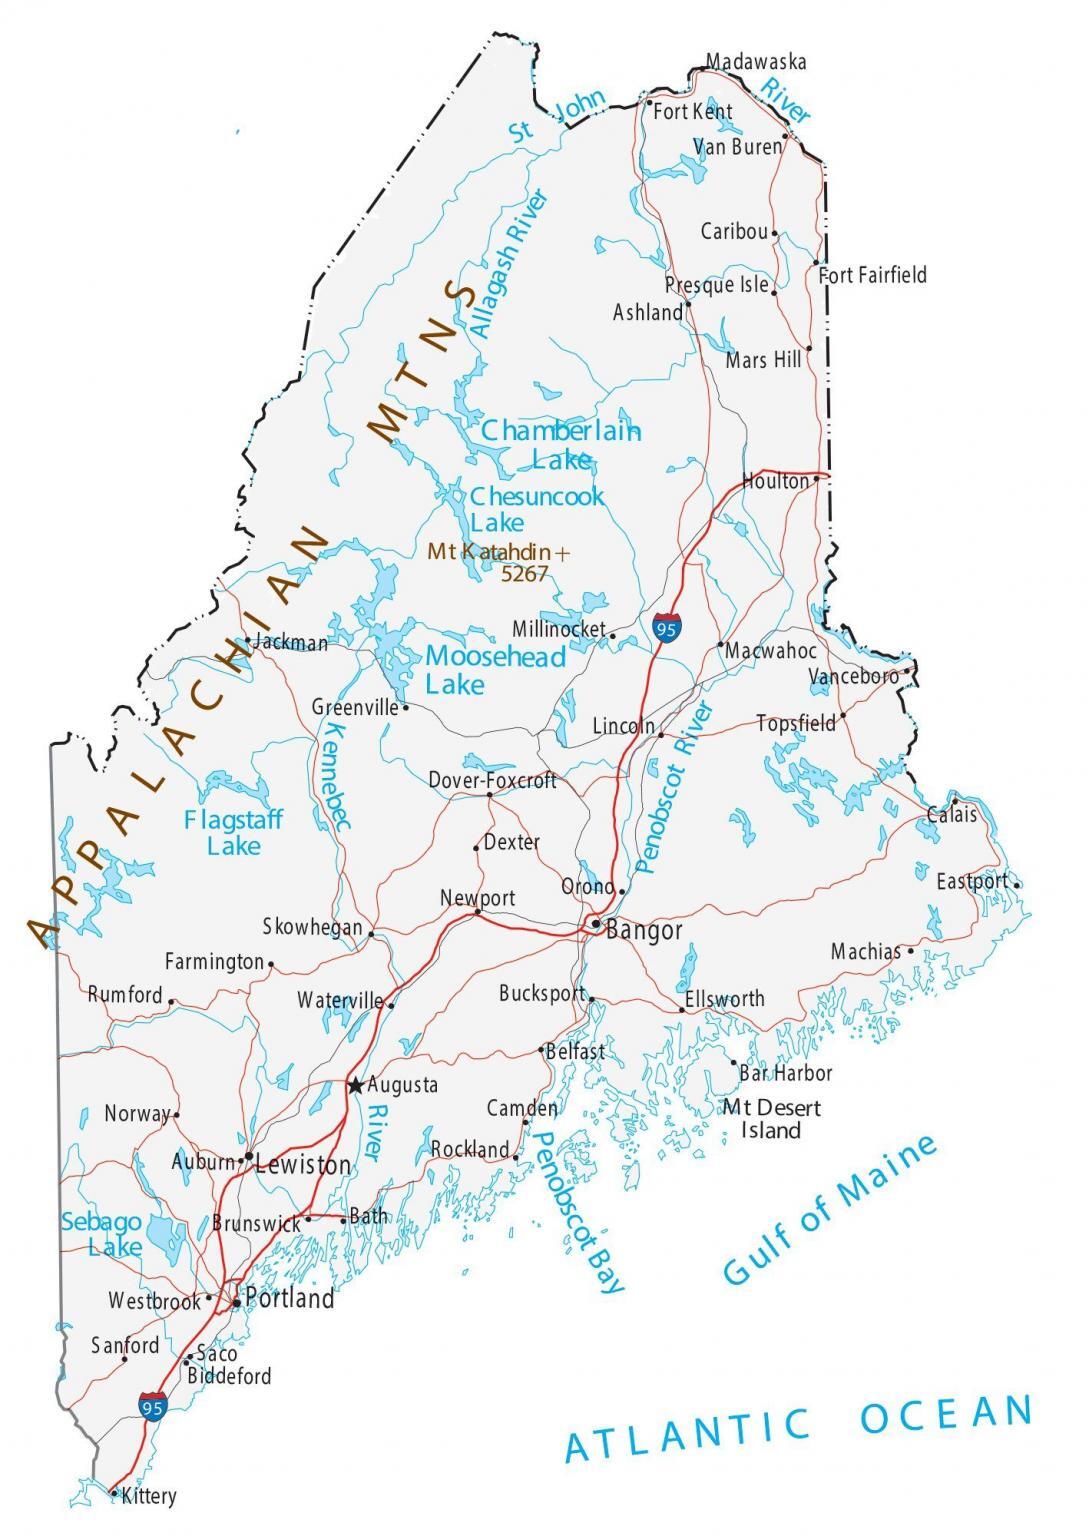 map-of-maine-cities-and-roads-gis-geography